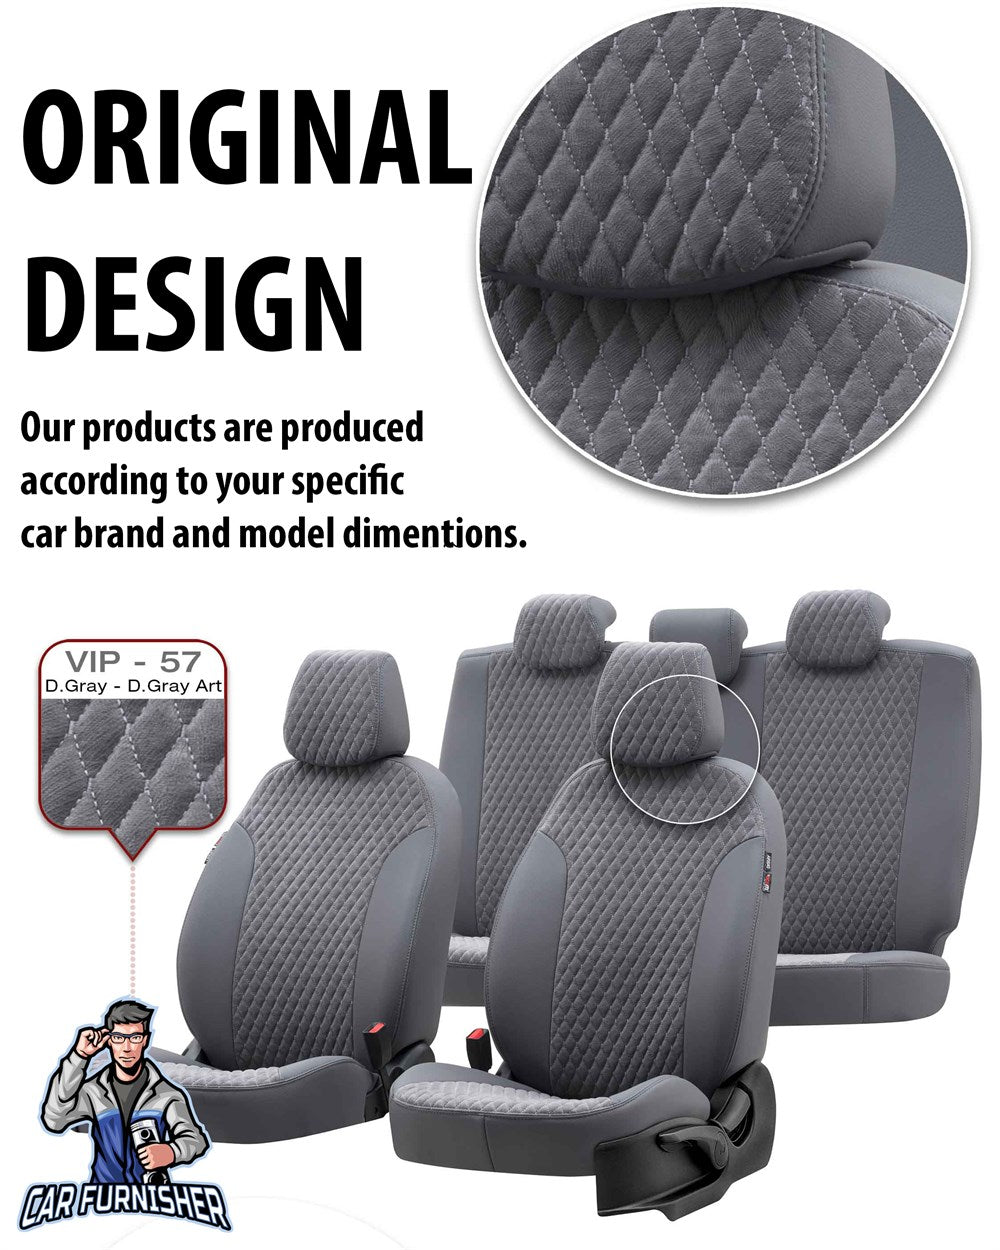 Fiat Palio Seat Covers Amsterdam Foal Feather Design Smoked Black Leather & Foal Feather